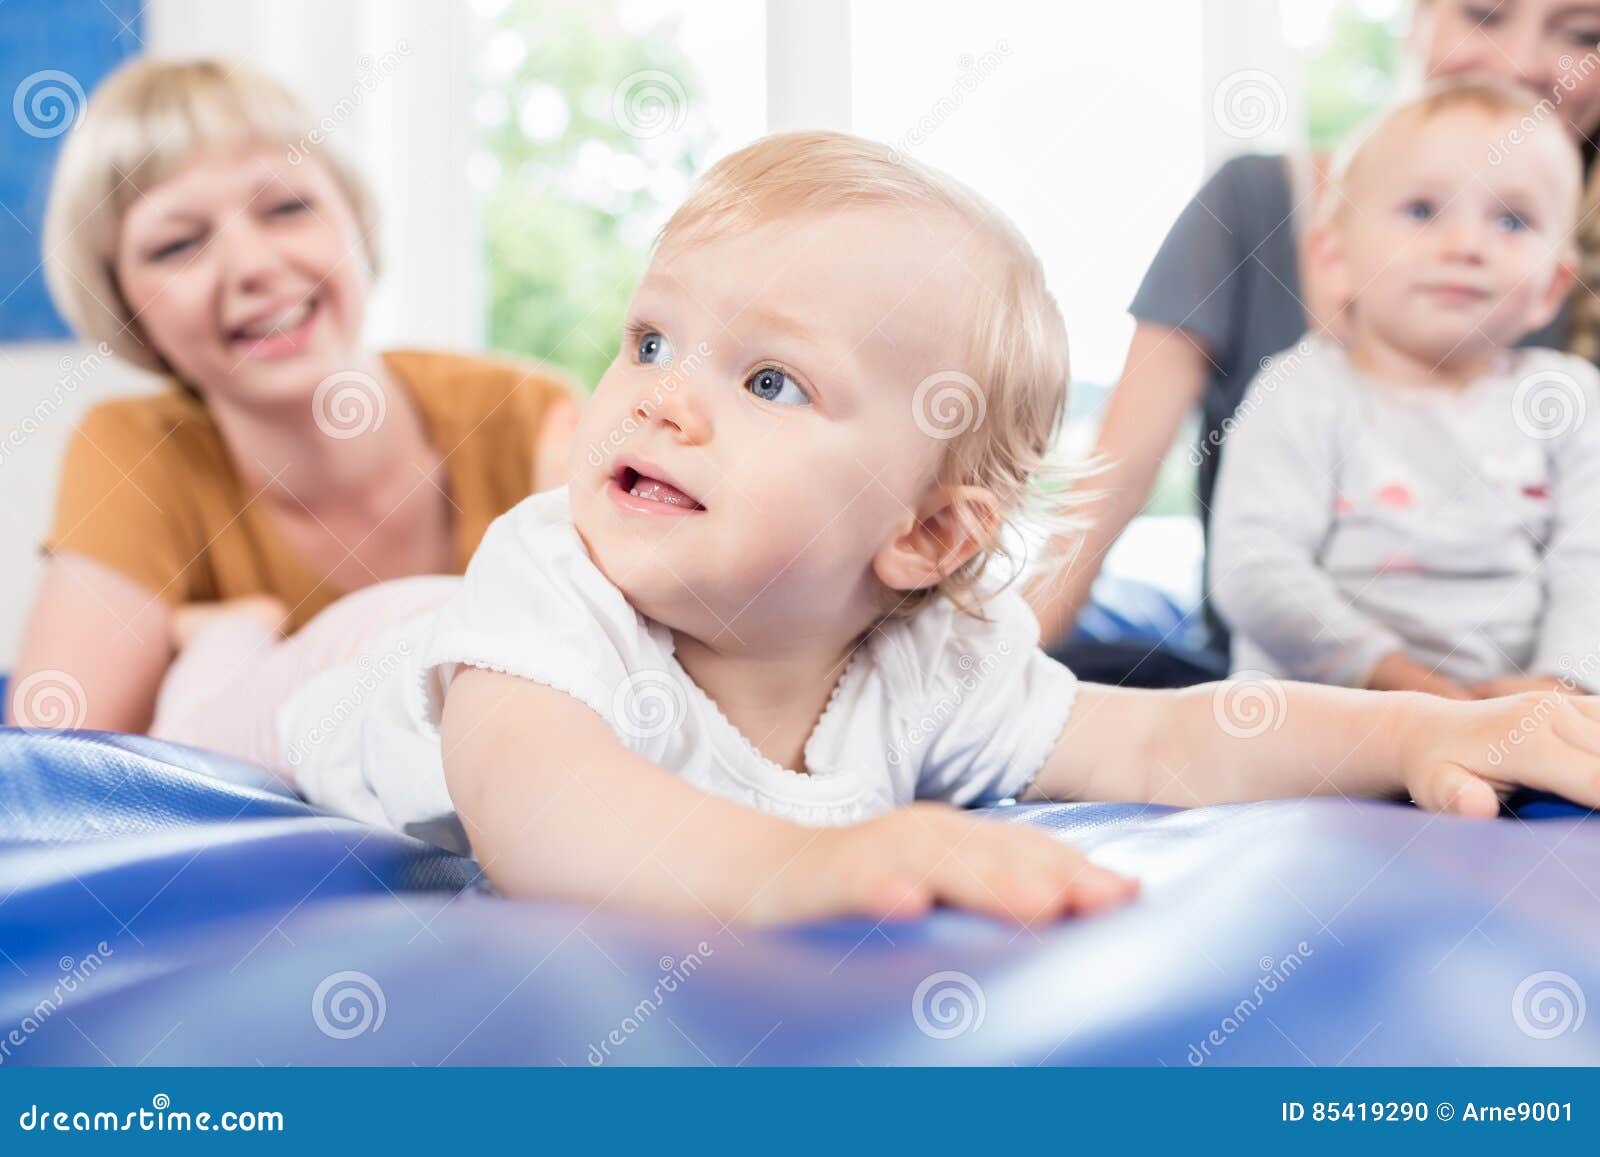 babies and moms in postnatal mother and child course